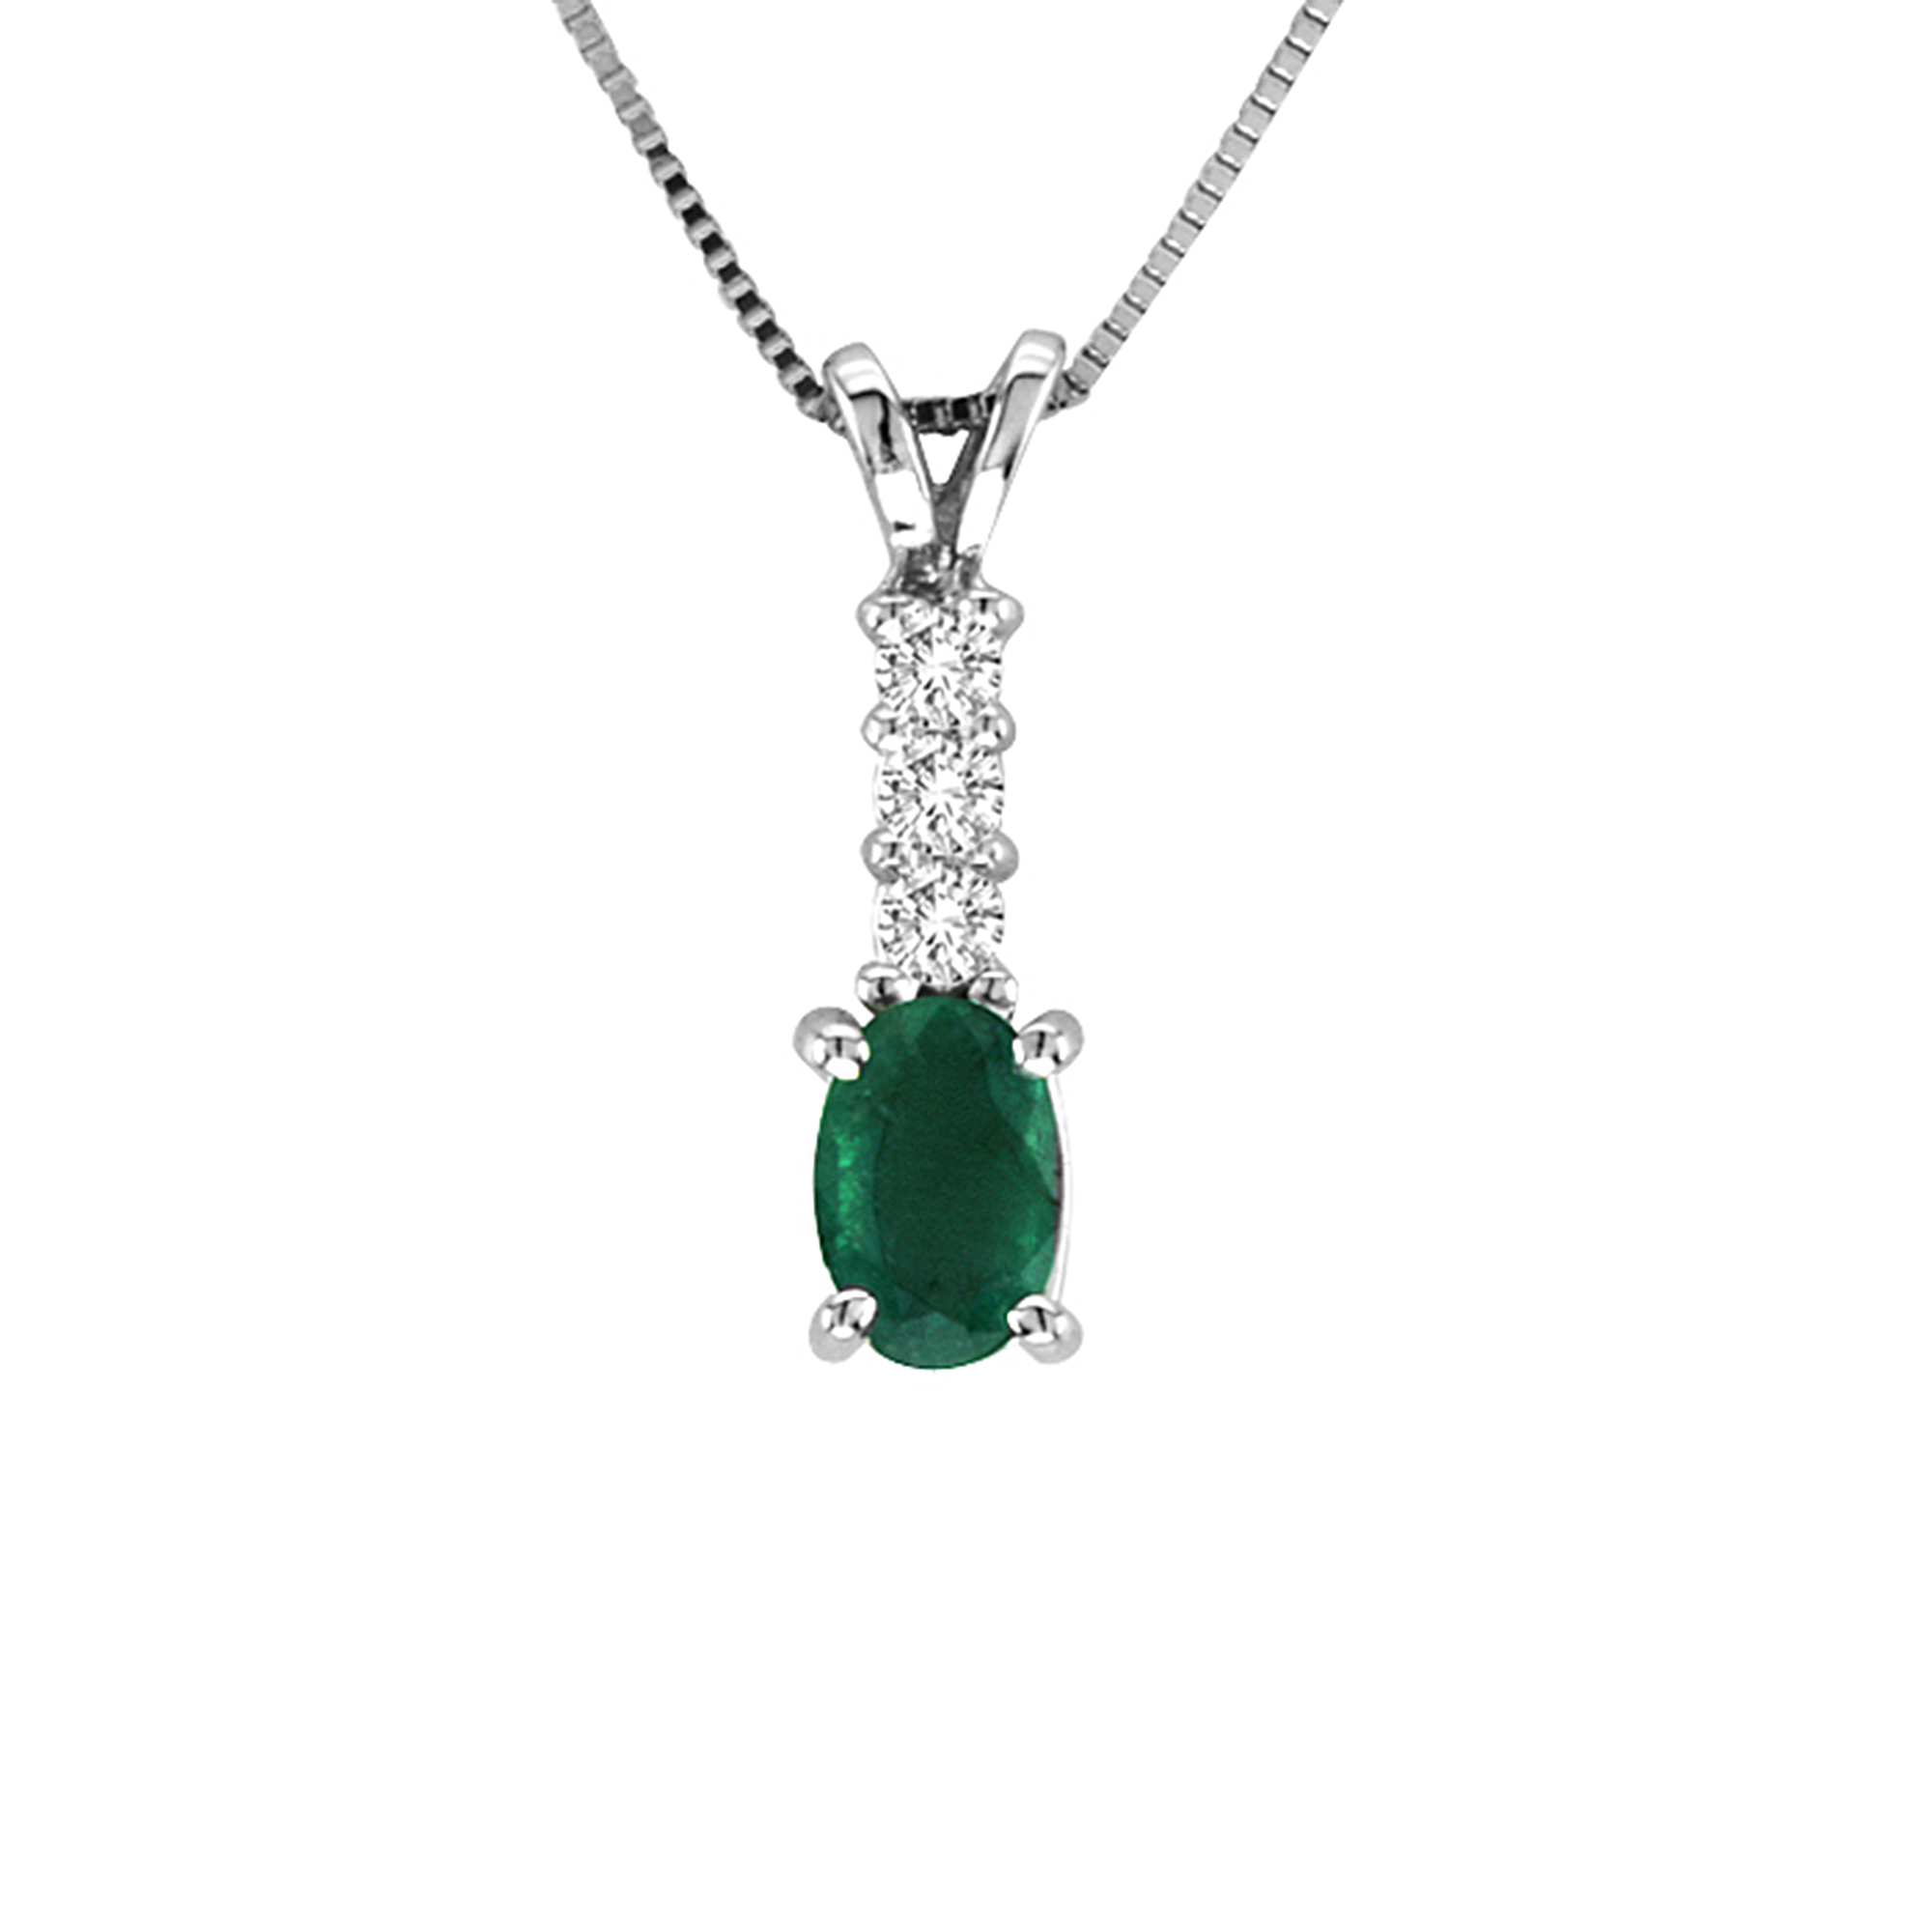 View 0.64cttw Emerald and Diamond Pendant in in 14k Gold